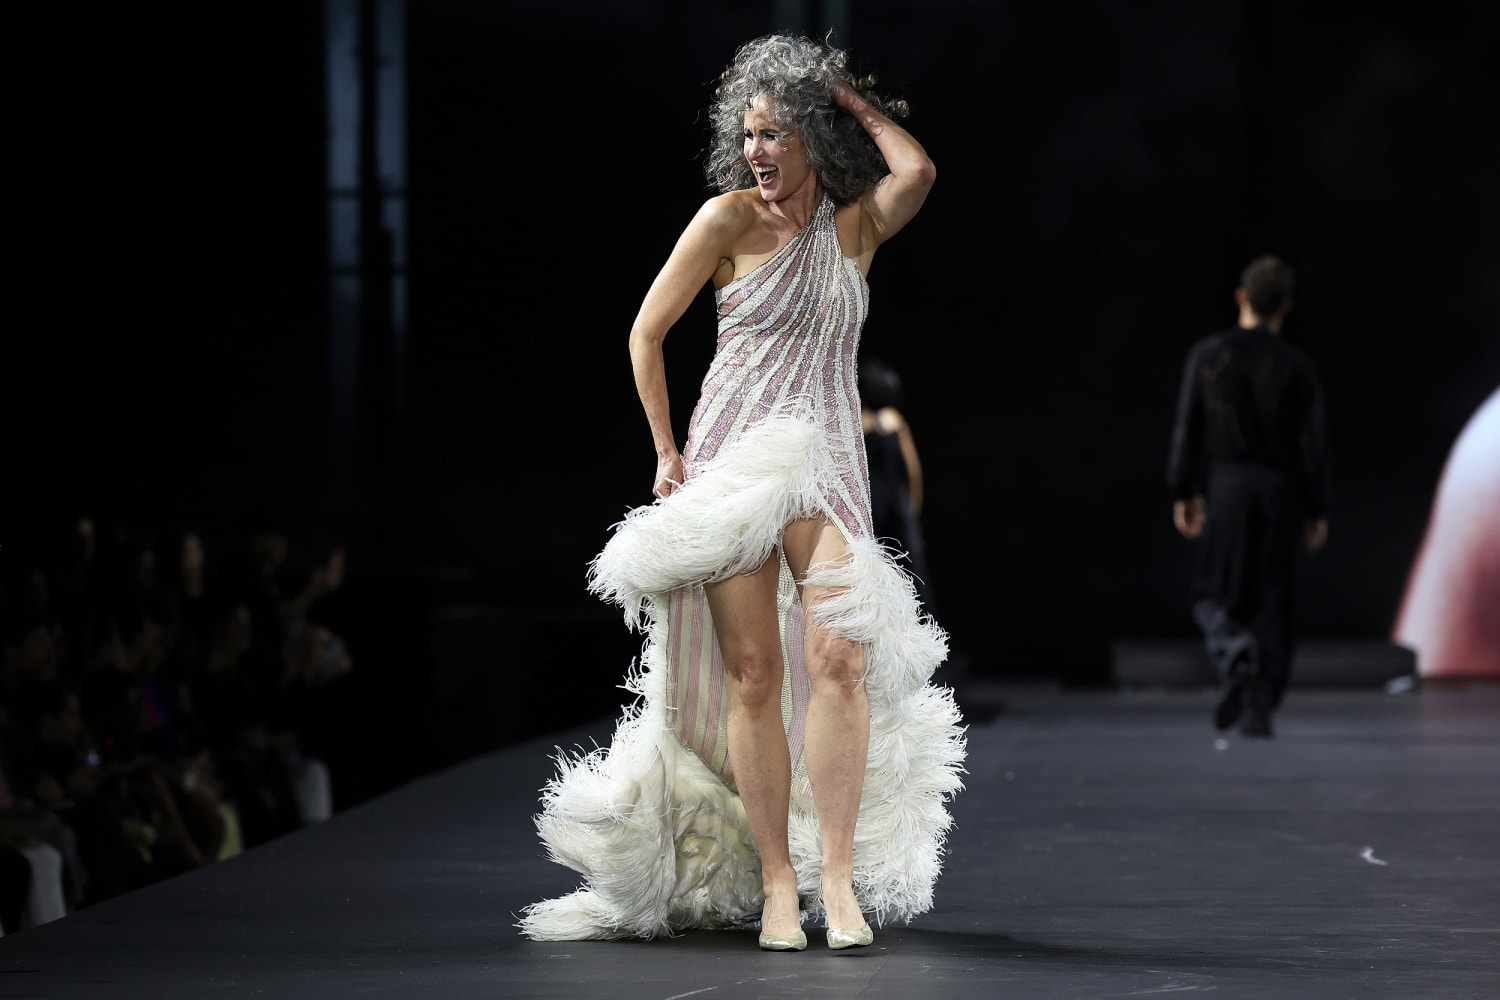 Andie MacDowell rocks gray curls and feathers on the runway at Paris Fashion  Week